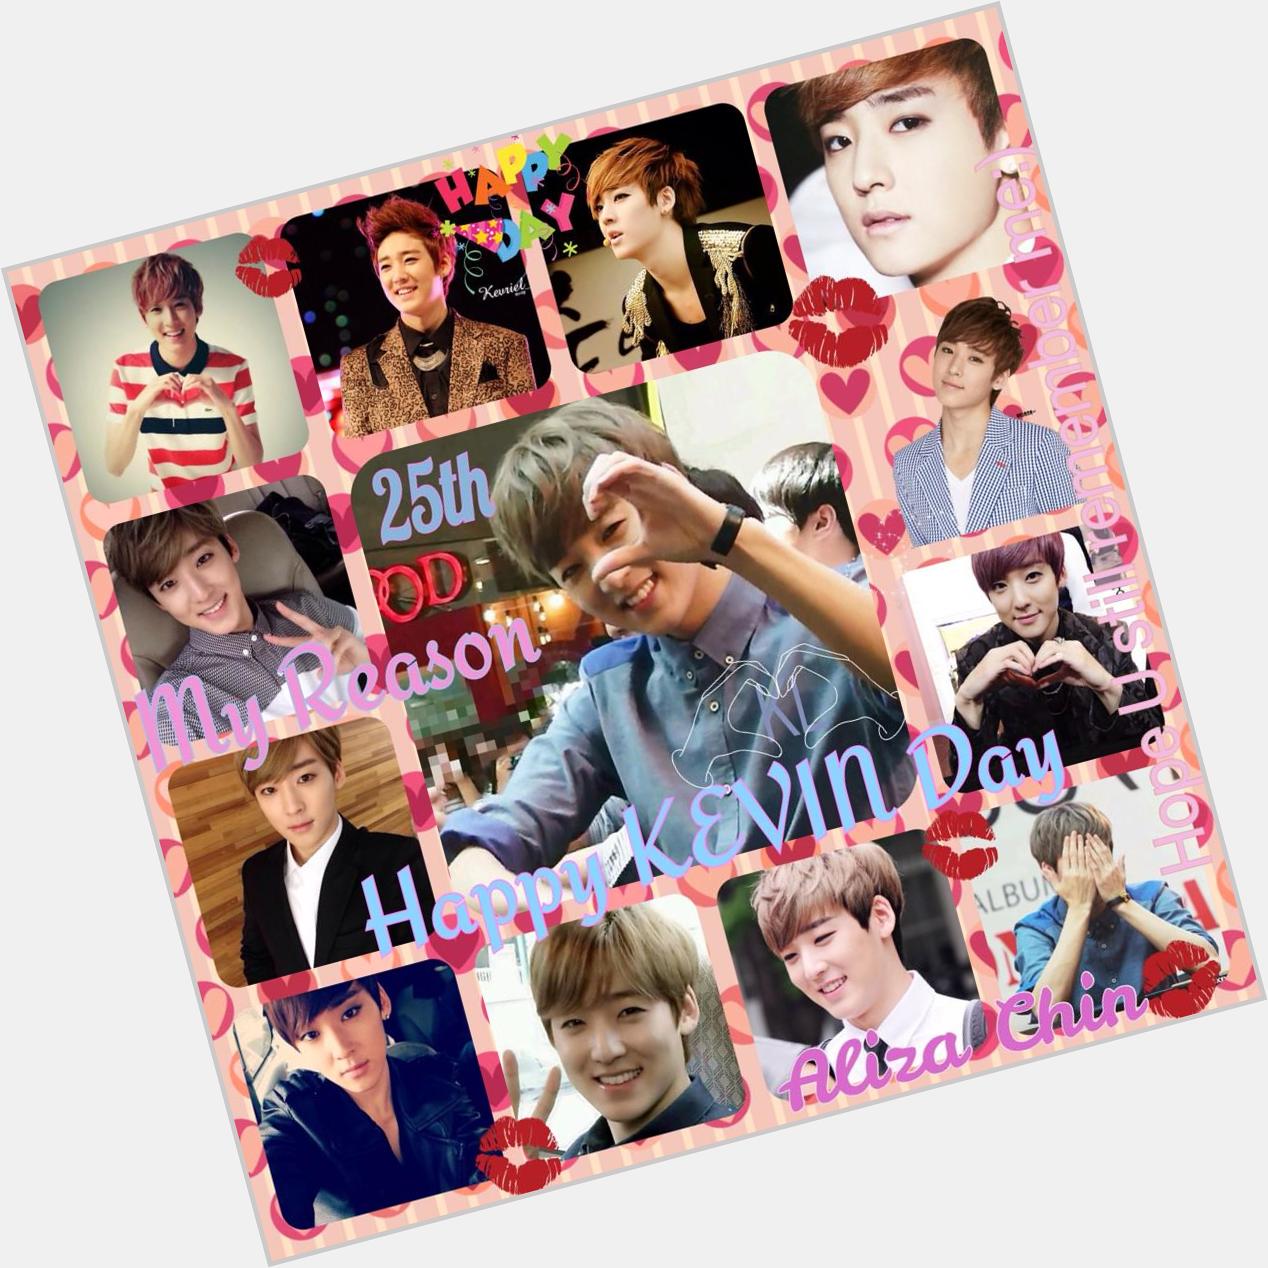  Happy birthday Kevin woo Oppa wish you all the best^^  smiling :) 